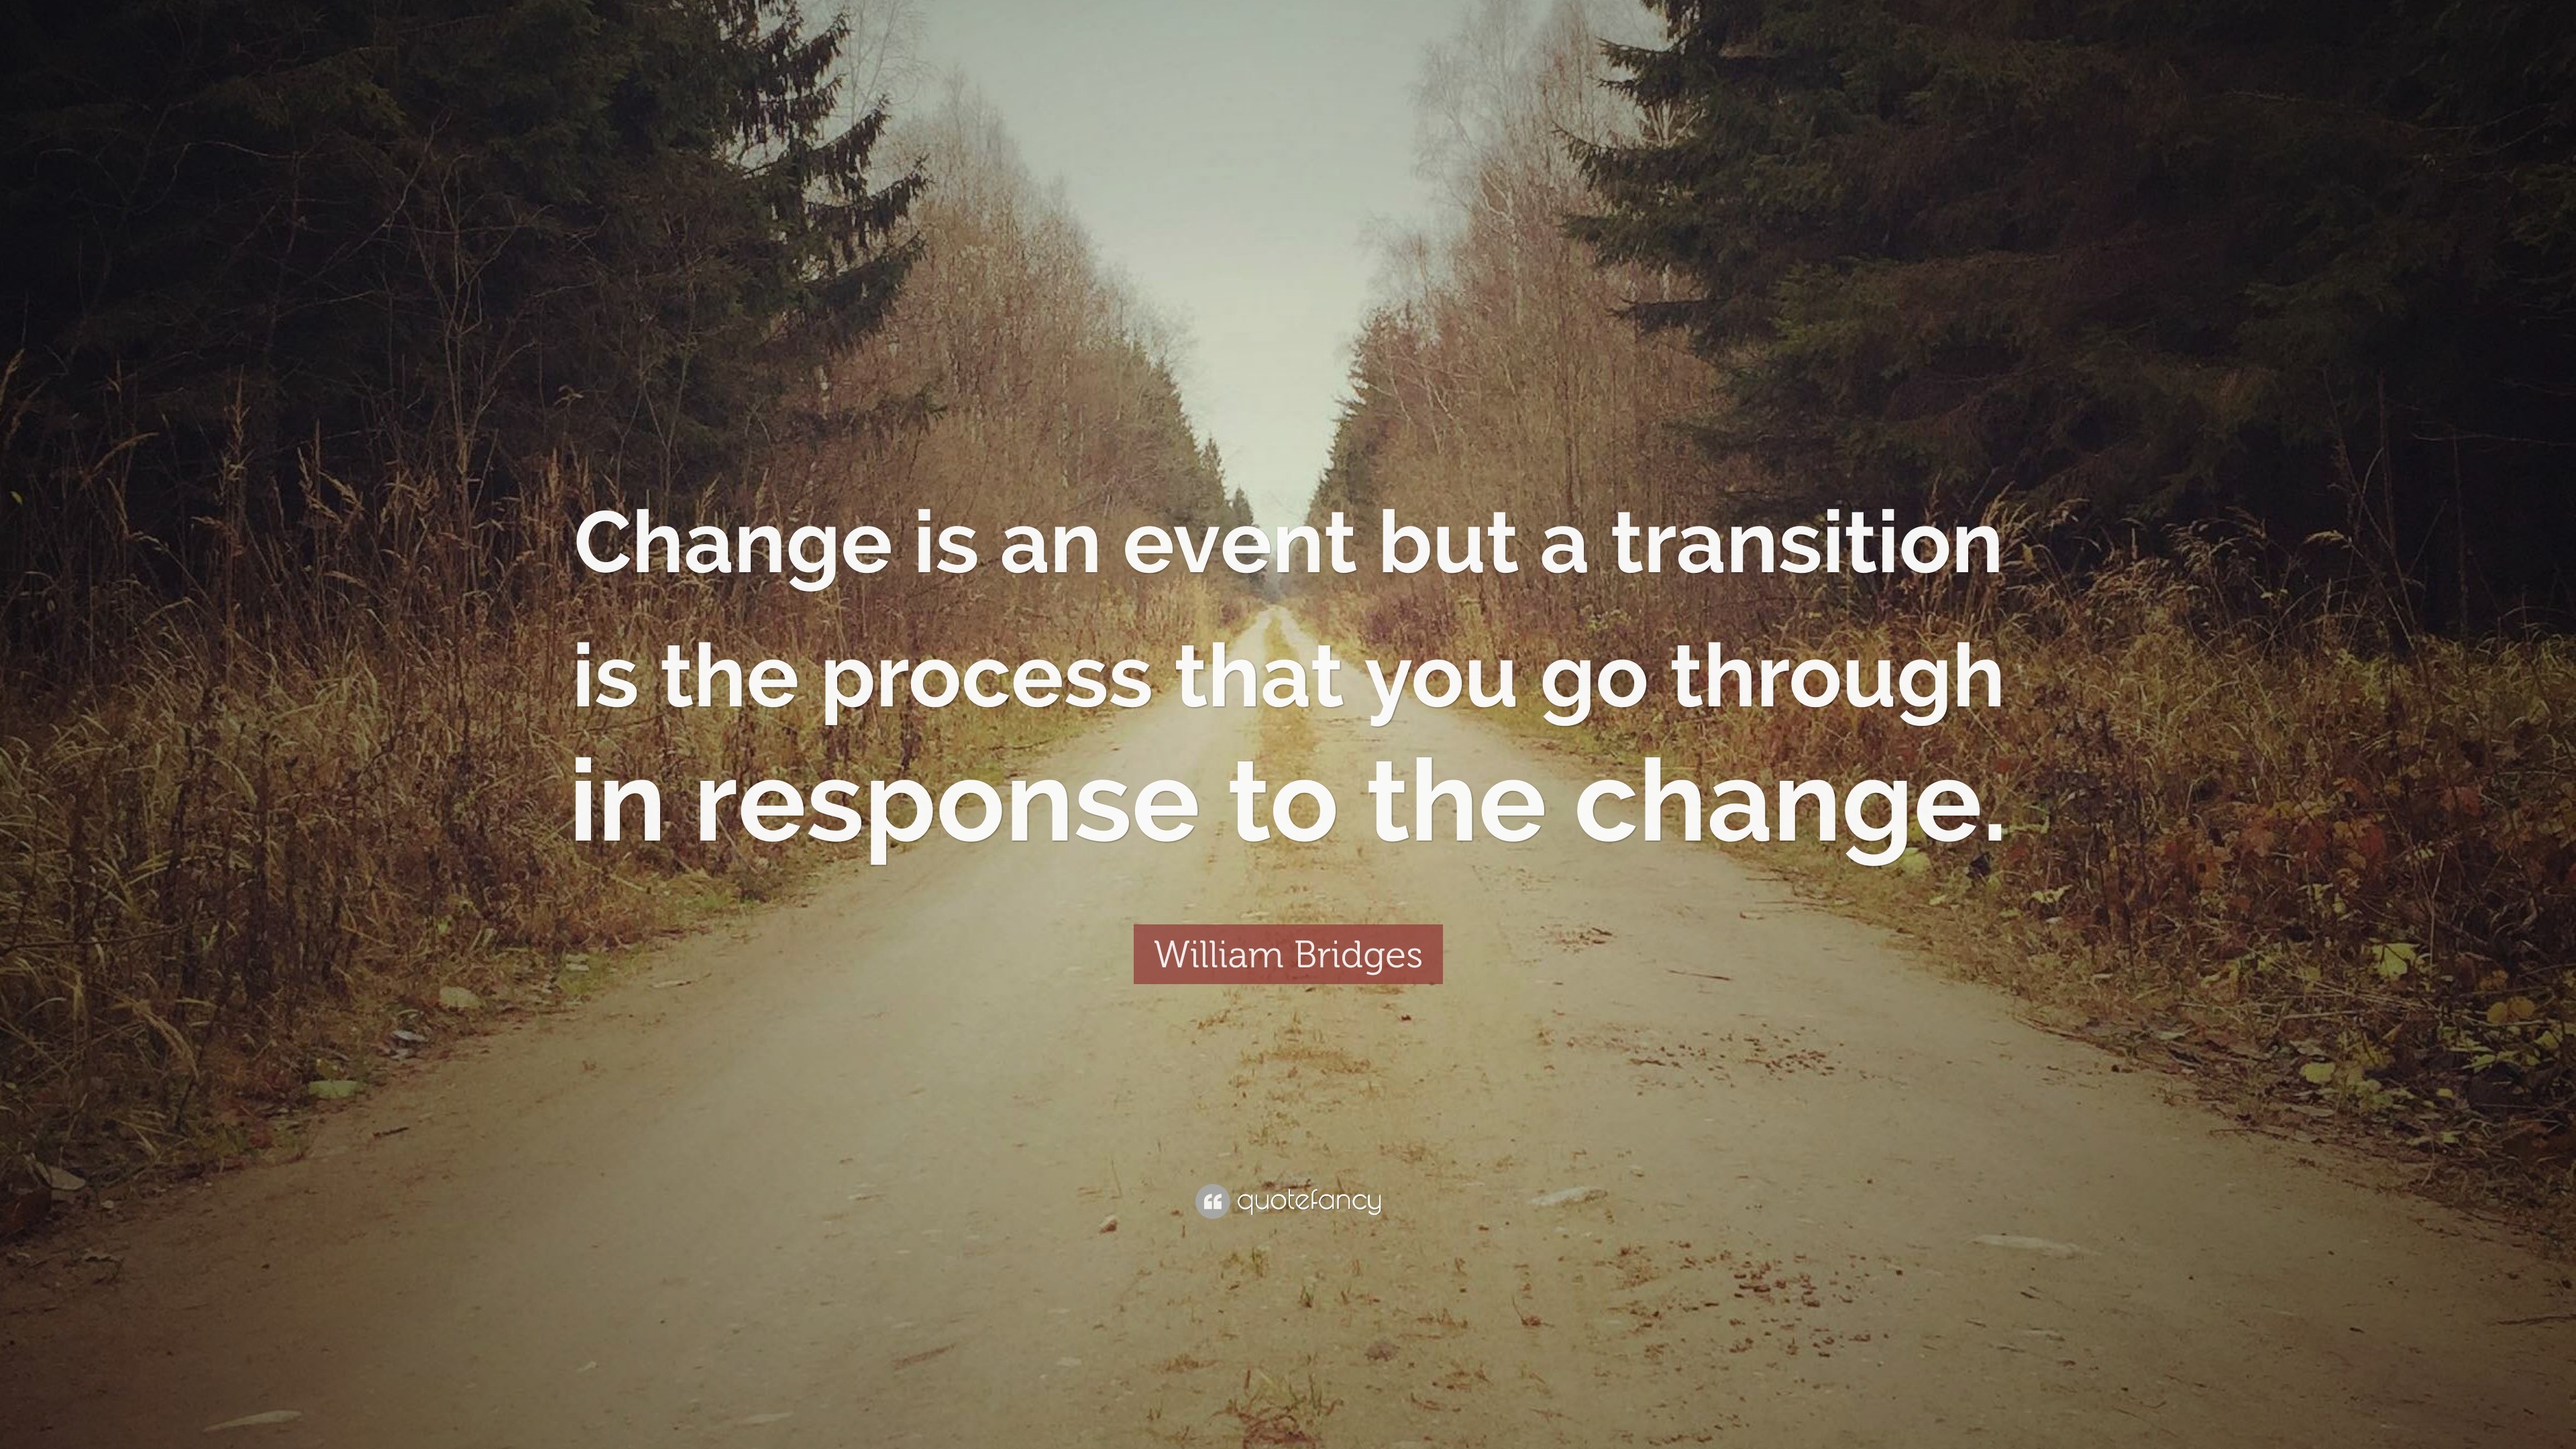 William Bridges Quote: “Change is an event but a transition is the ...